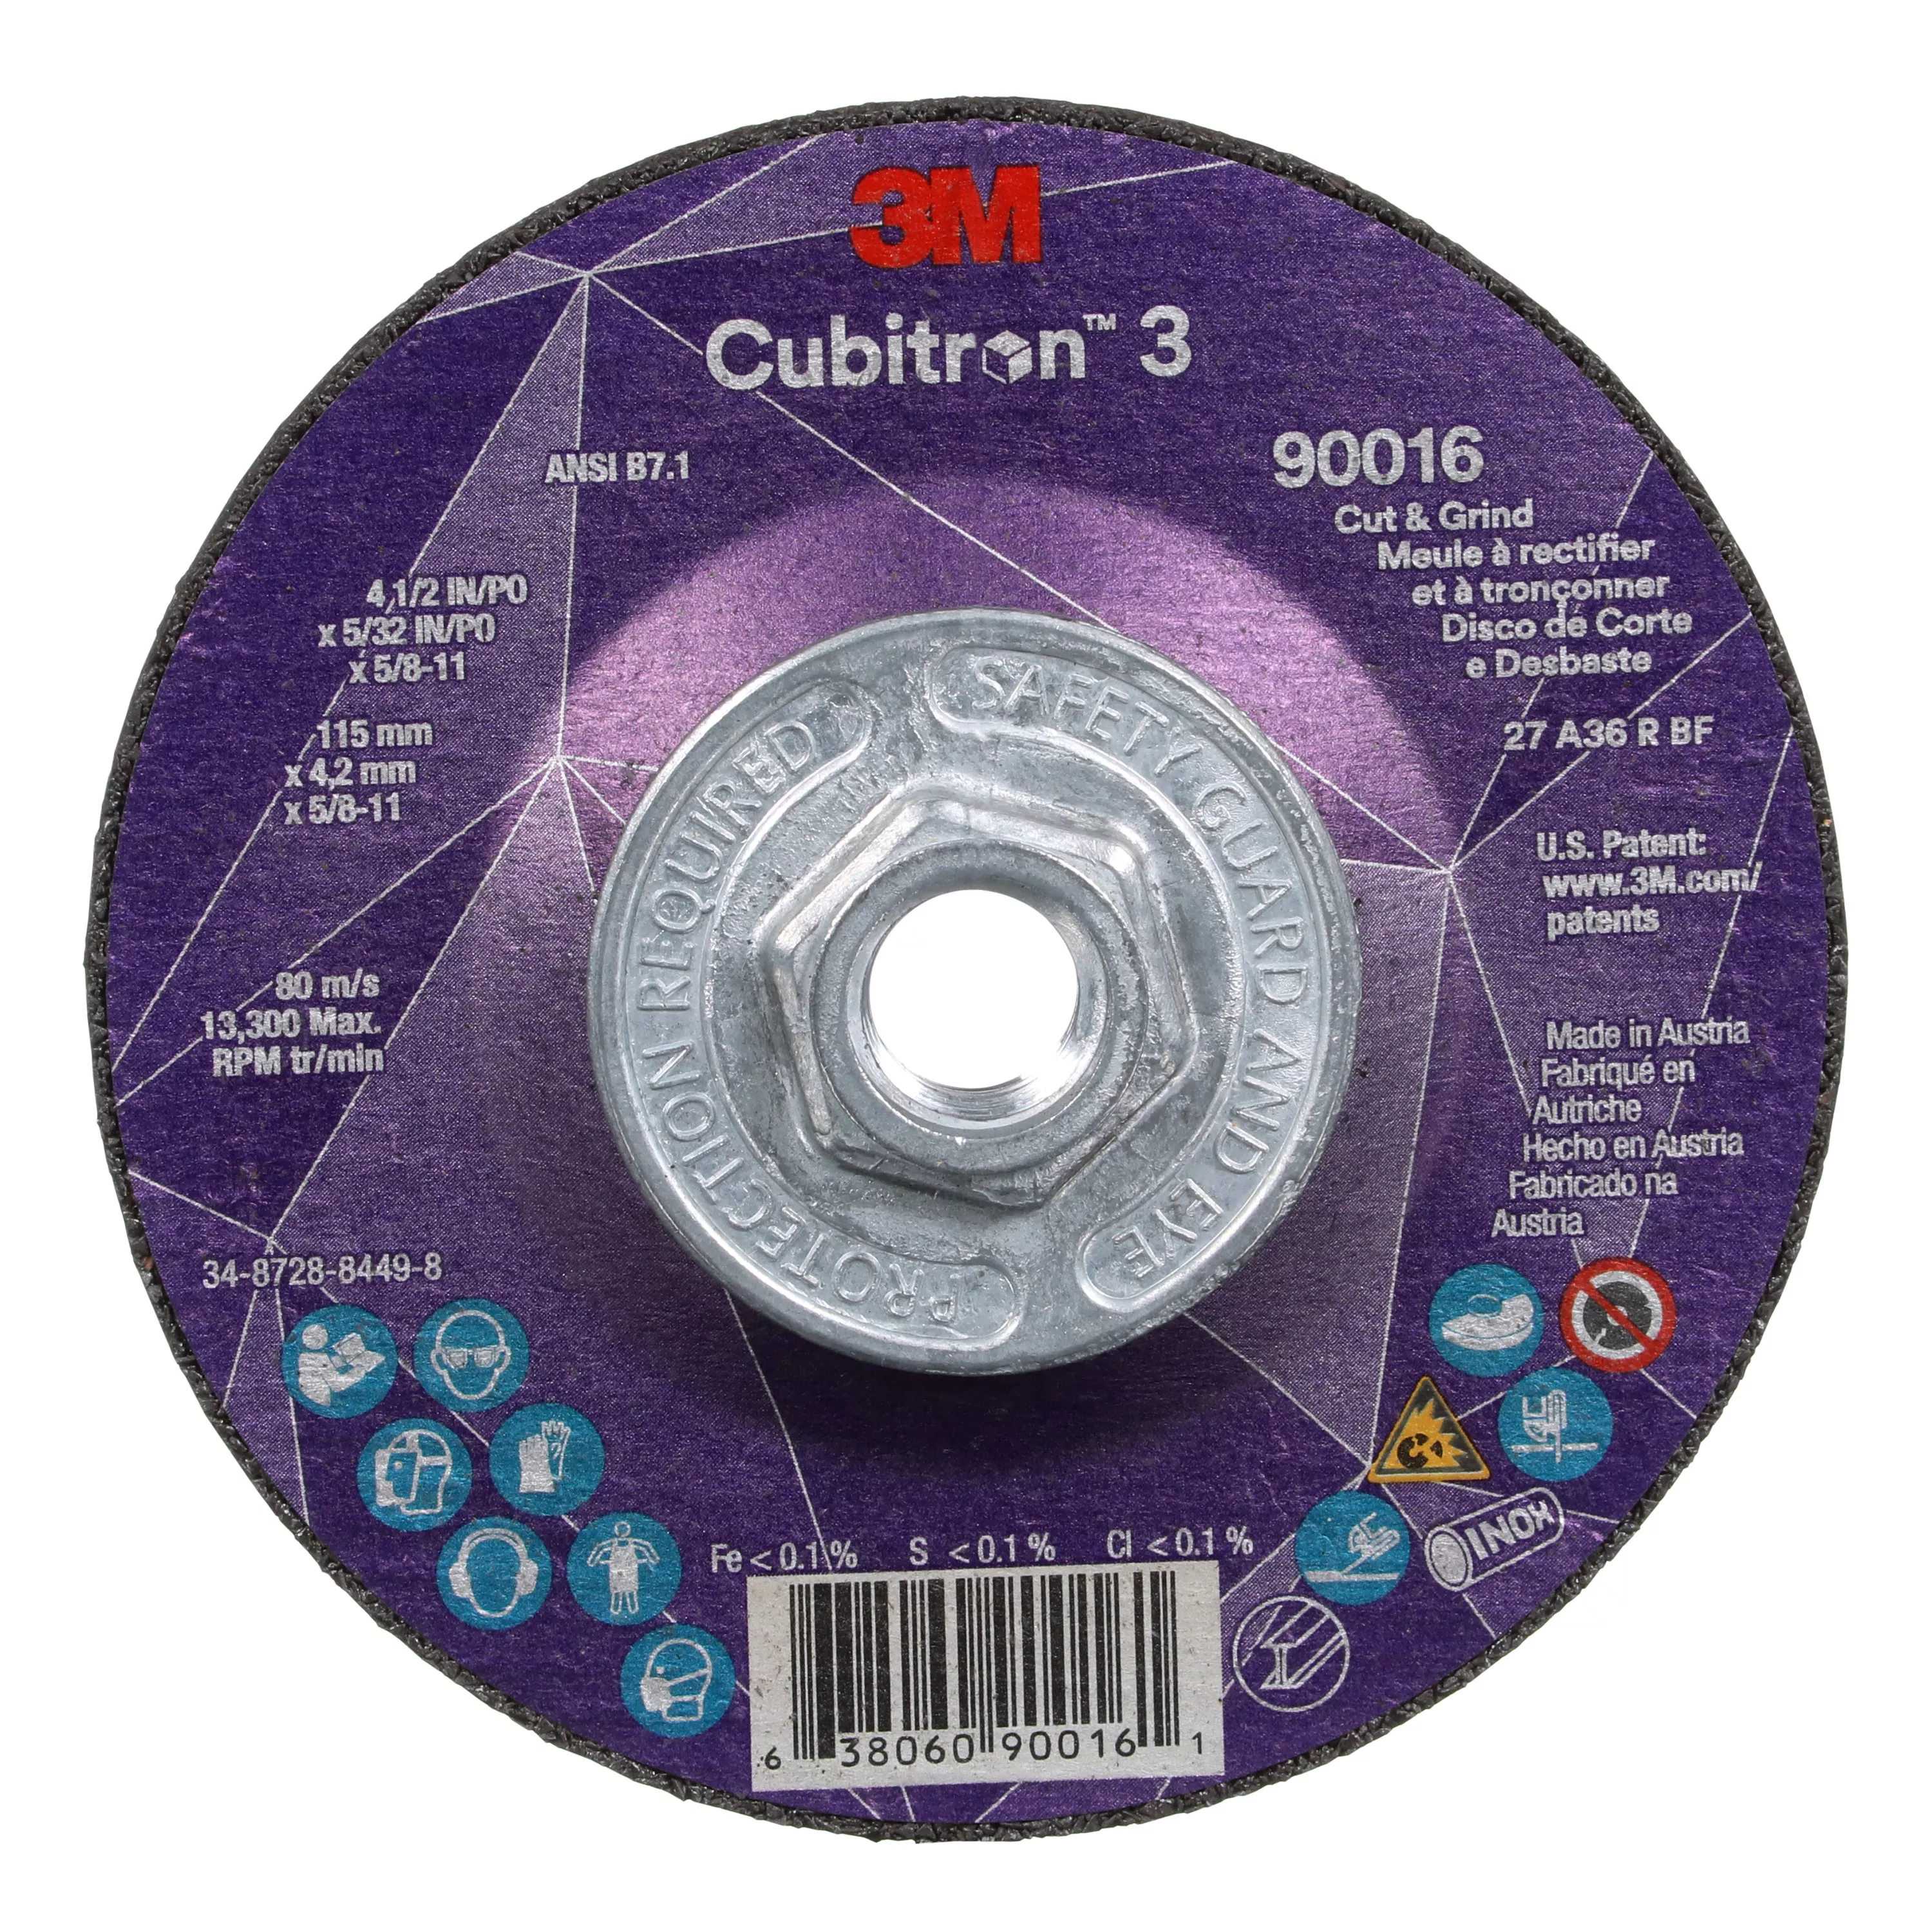 3M™ Cubitron™ 3 Cut and Grind Wheel, 90016, 36+, T27, 4-1/2 in x 5/32 in
x 5/8 in-11 (115 x 4.2 mm x 5/8-11 in), ANSI, 10 ea/Case